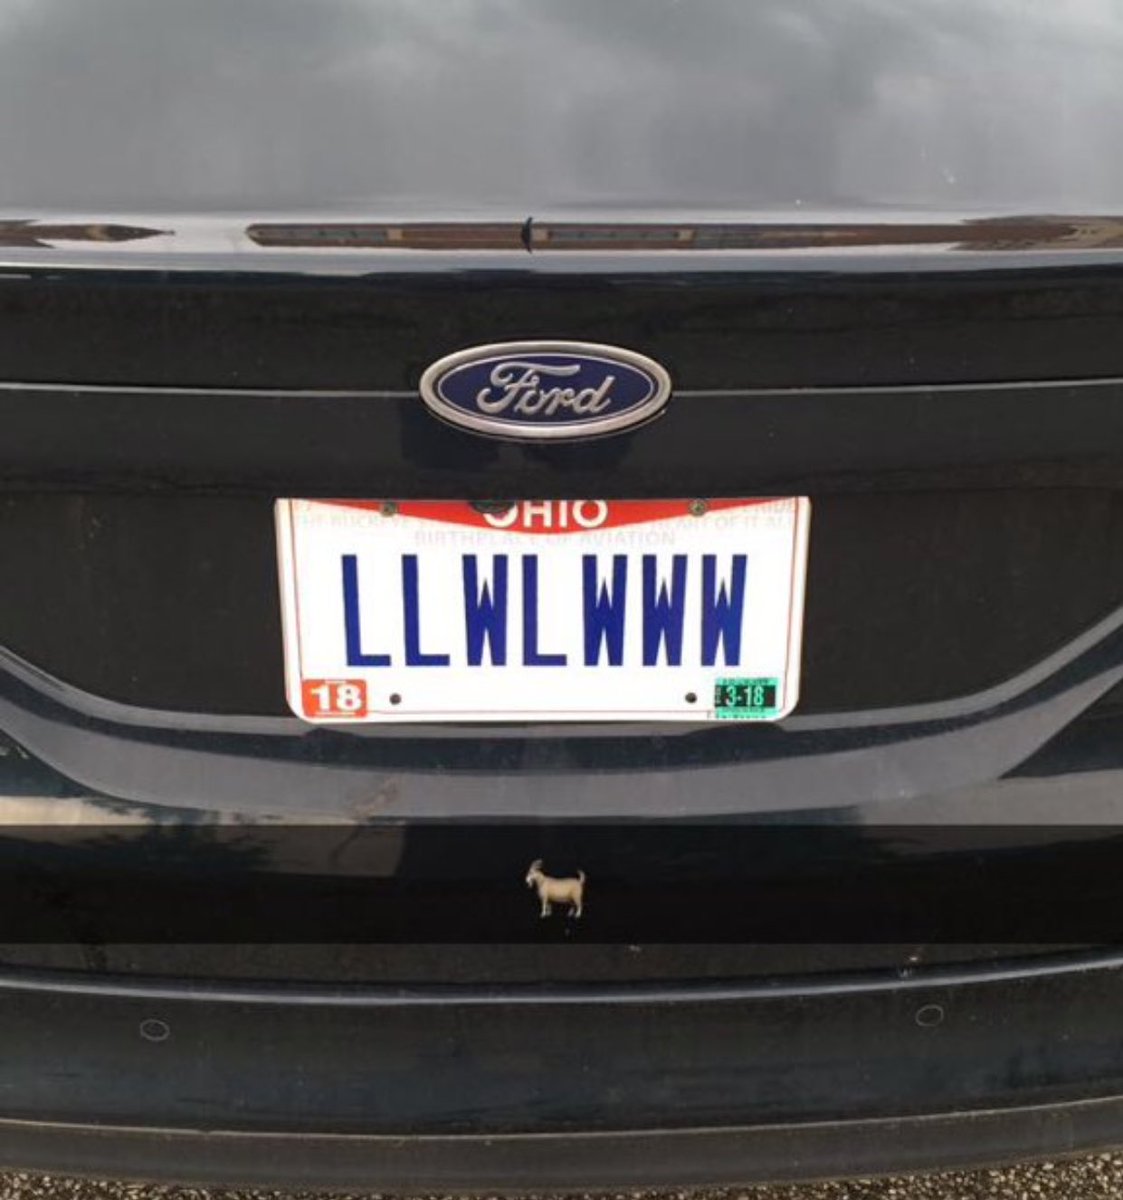 The "they blew a 3-1 lead" license plate has been found in Clevel...